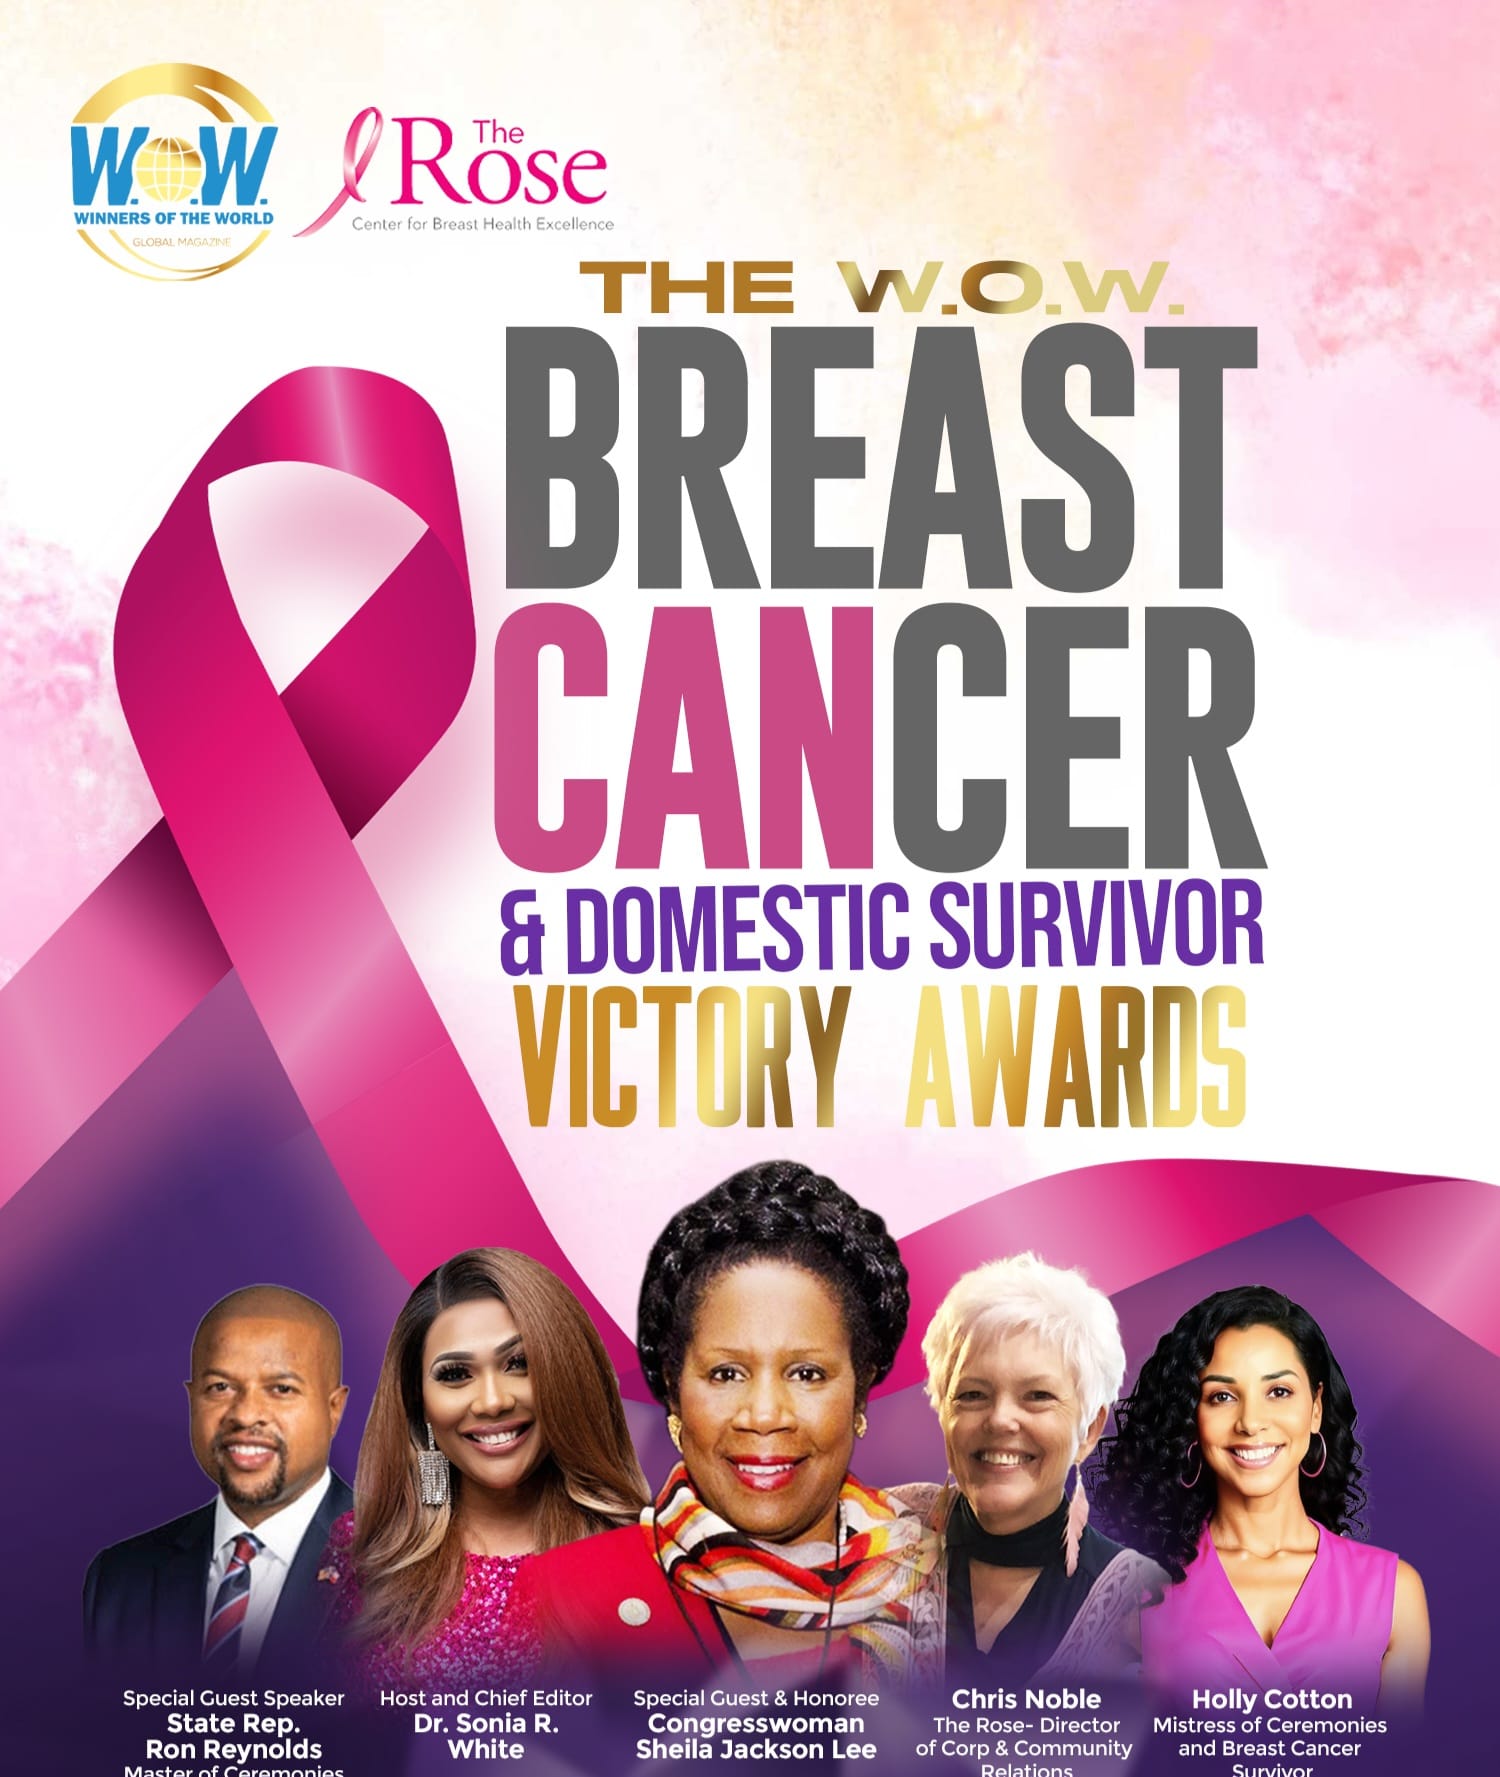 Triumph Over Adversity Celebrated at the Inaugural Pink and Purple Victory Ceremony Hosted by Dr. Sonia White